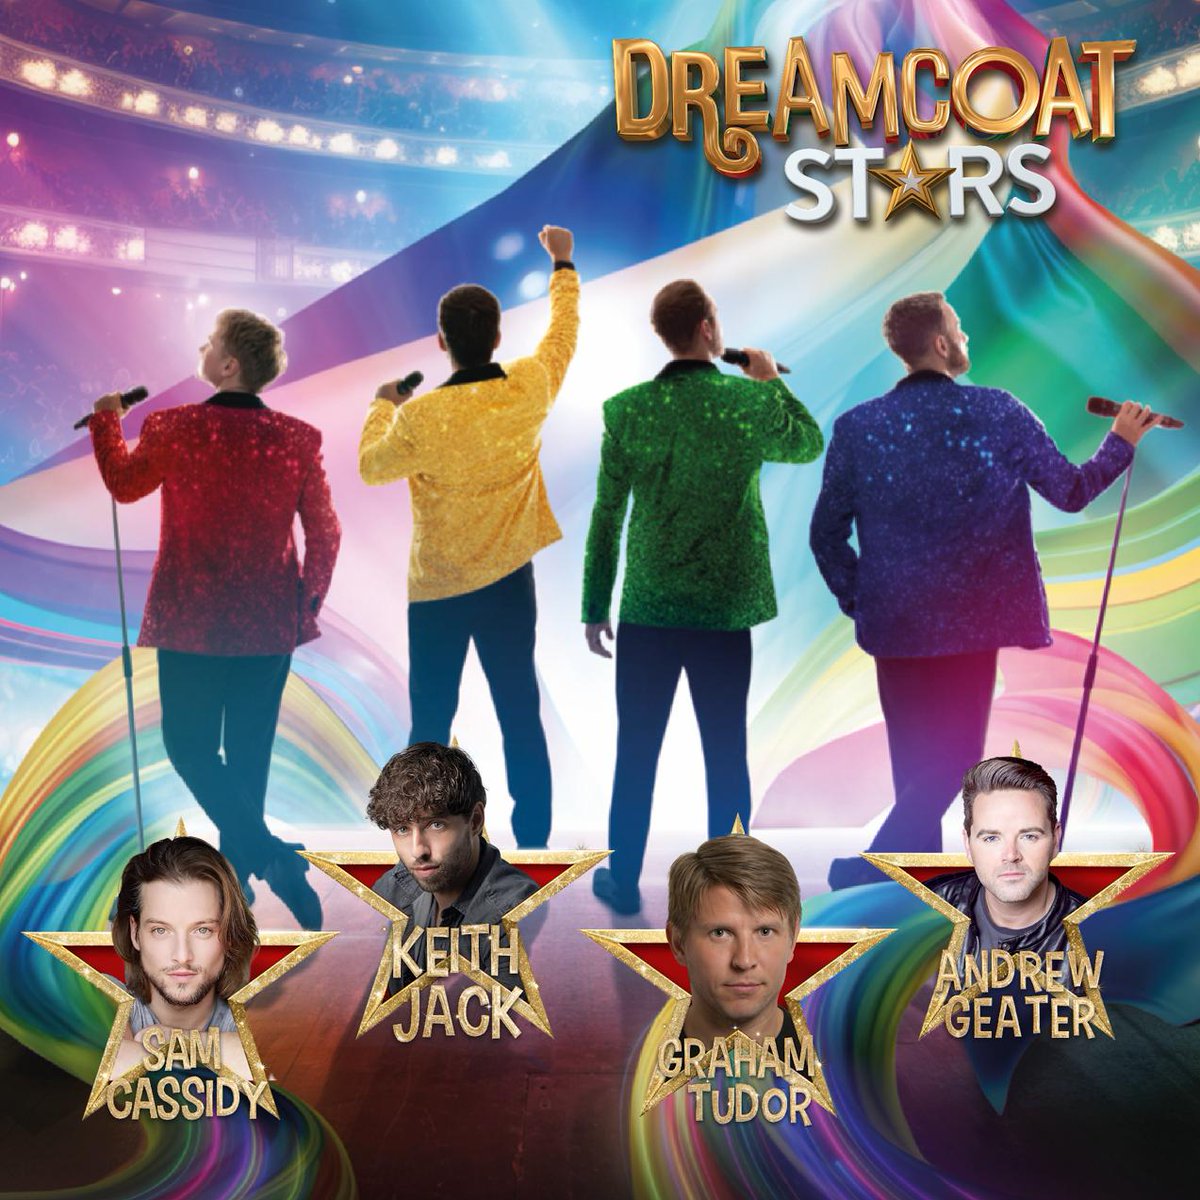 🌈Dreamcoat Stars🌈 Starring Any Dream Will Do’s Keith Jack; TV star and UK tour Joseph Sam Cassidy; West End’s leading man Graham Tudor; and introducing our first Pharaoh Andrew Geater. 📆Sun 12 May ⏰7.30pm 🎟£28 rotherhamtheatres.ticketsolve.com/ticketbooth/sh…